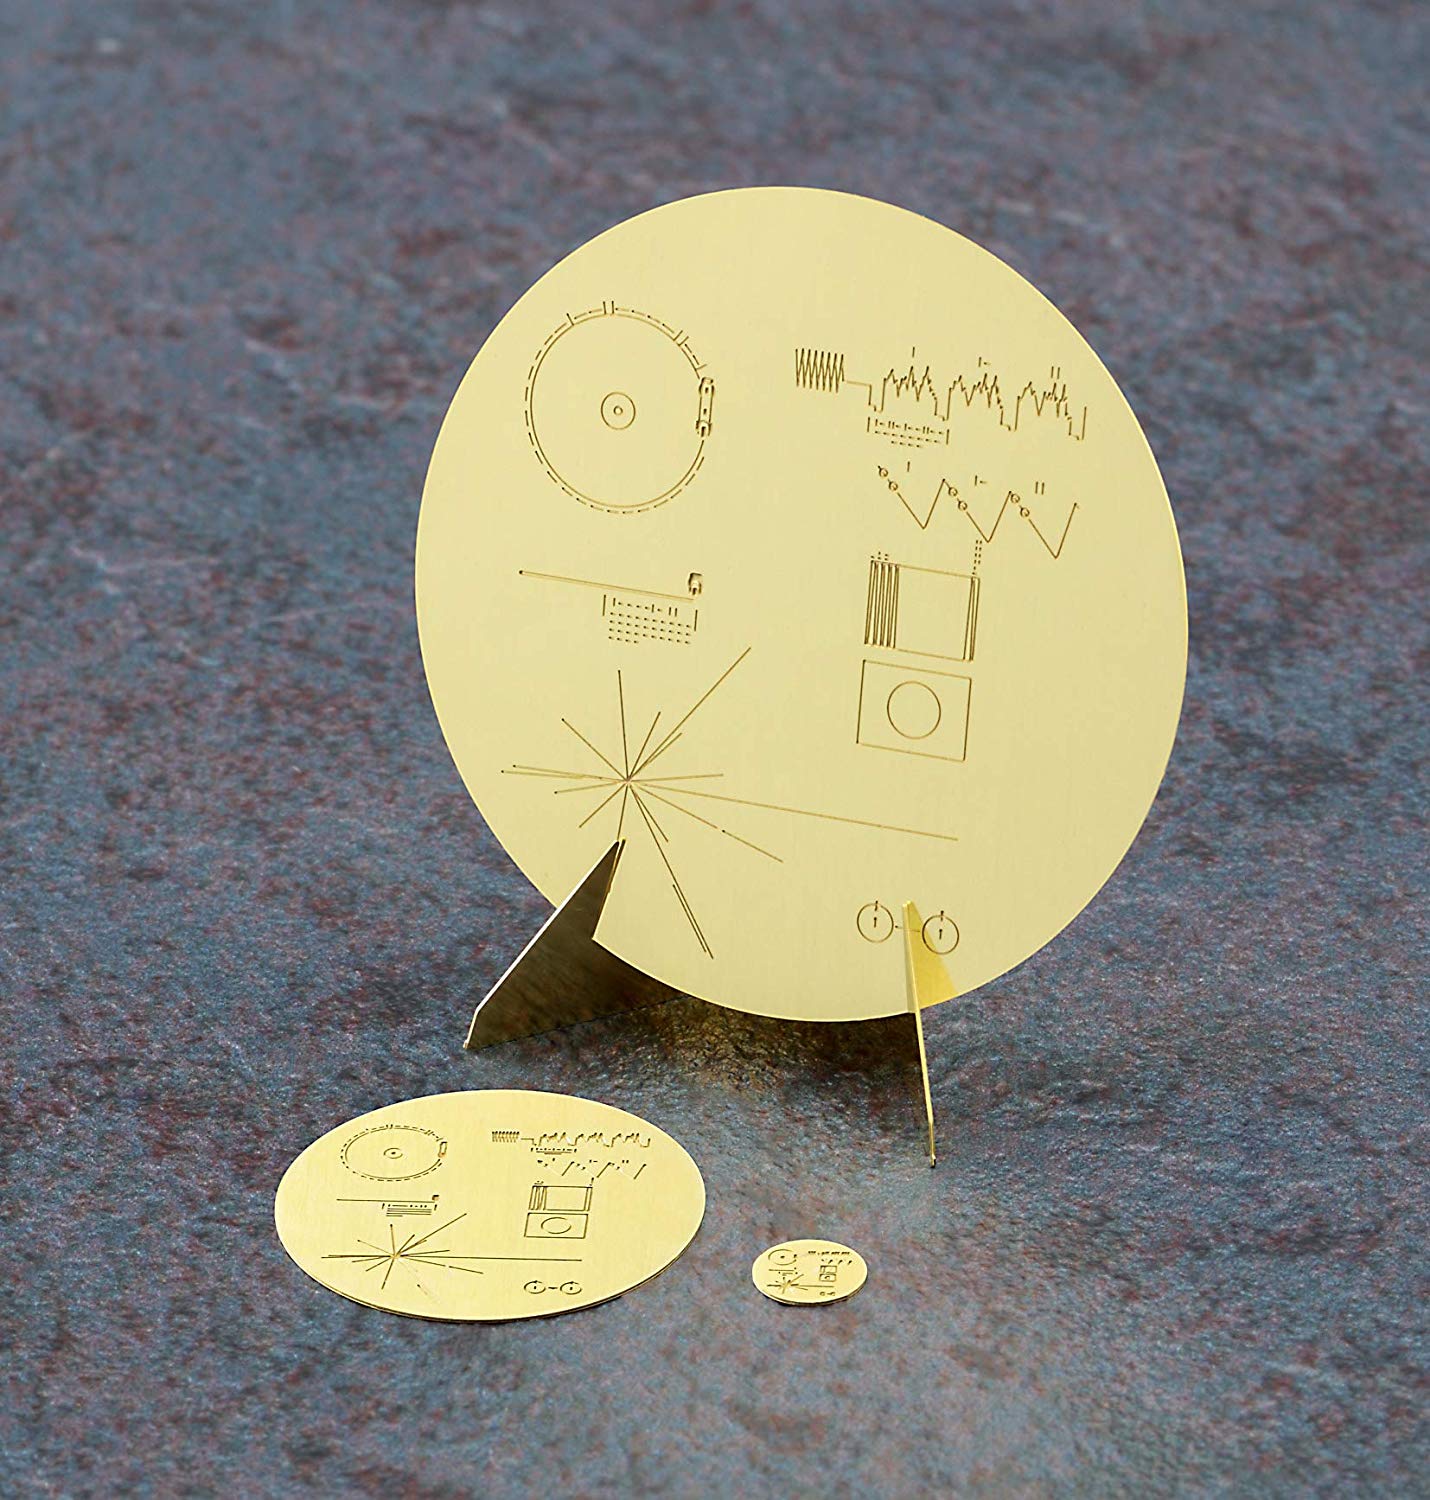 Unmanned Space Probe Voyager w/Golden Record Plate